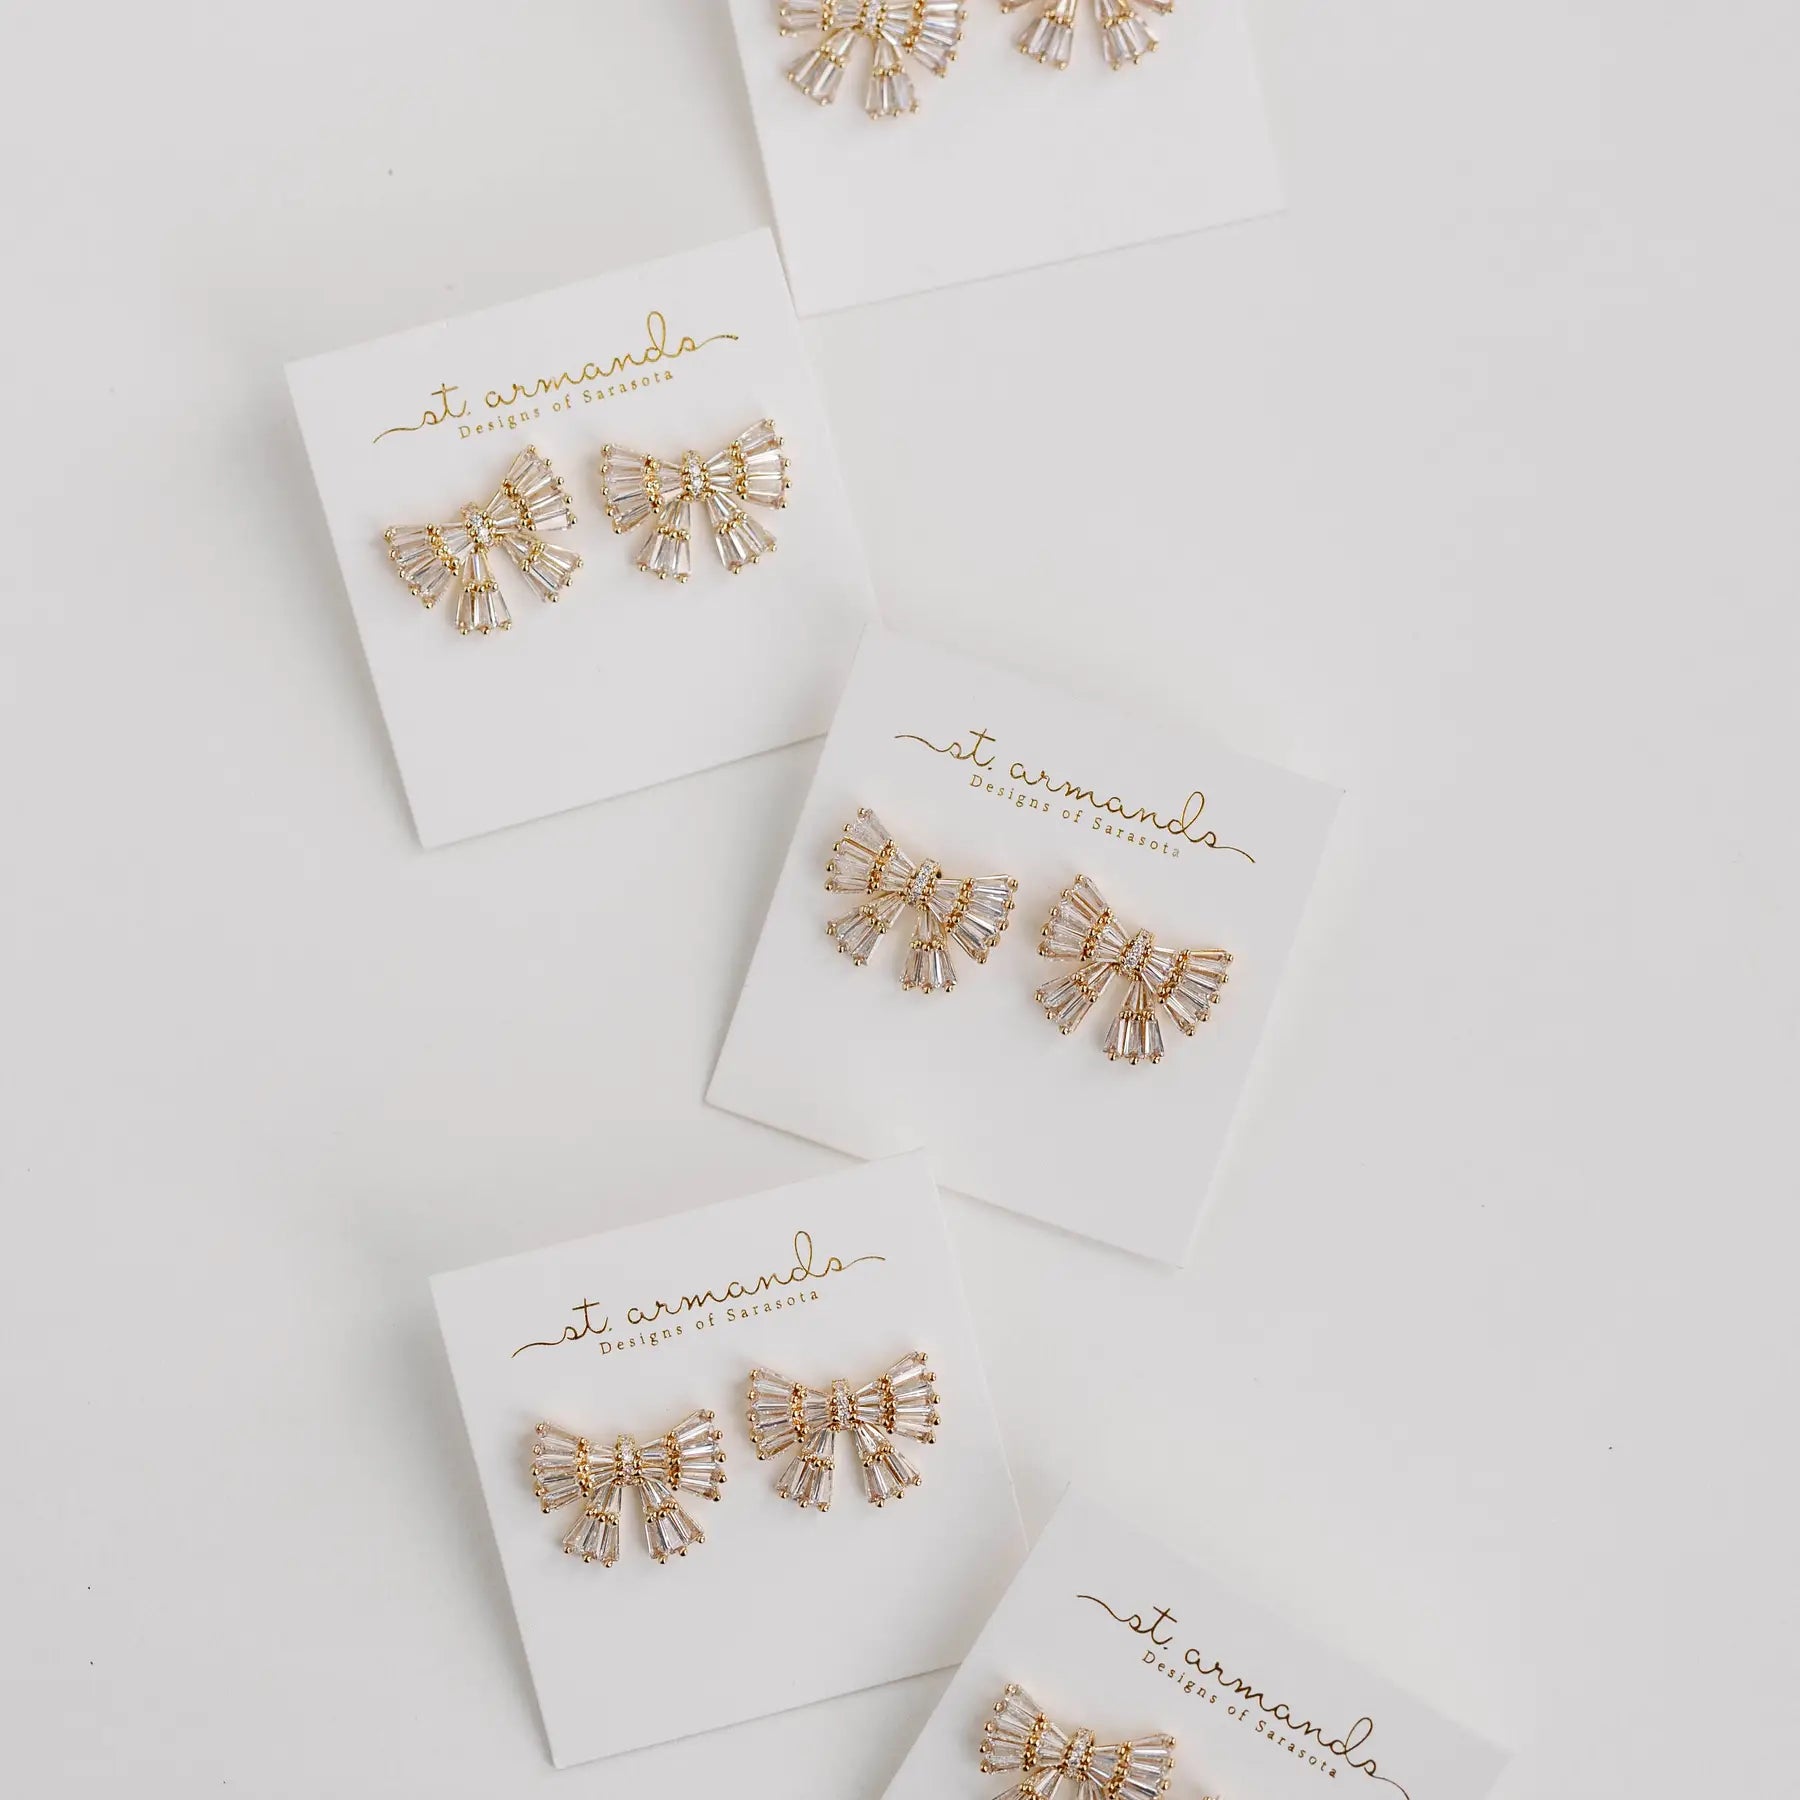 Gold Maxi Sparkler Statement Stud Bow Earrings-110 Jewelry & Hair-St Armands Designs of Sarasota-July & June Women's Fashion Boutique Located in San Antonio, Texas